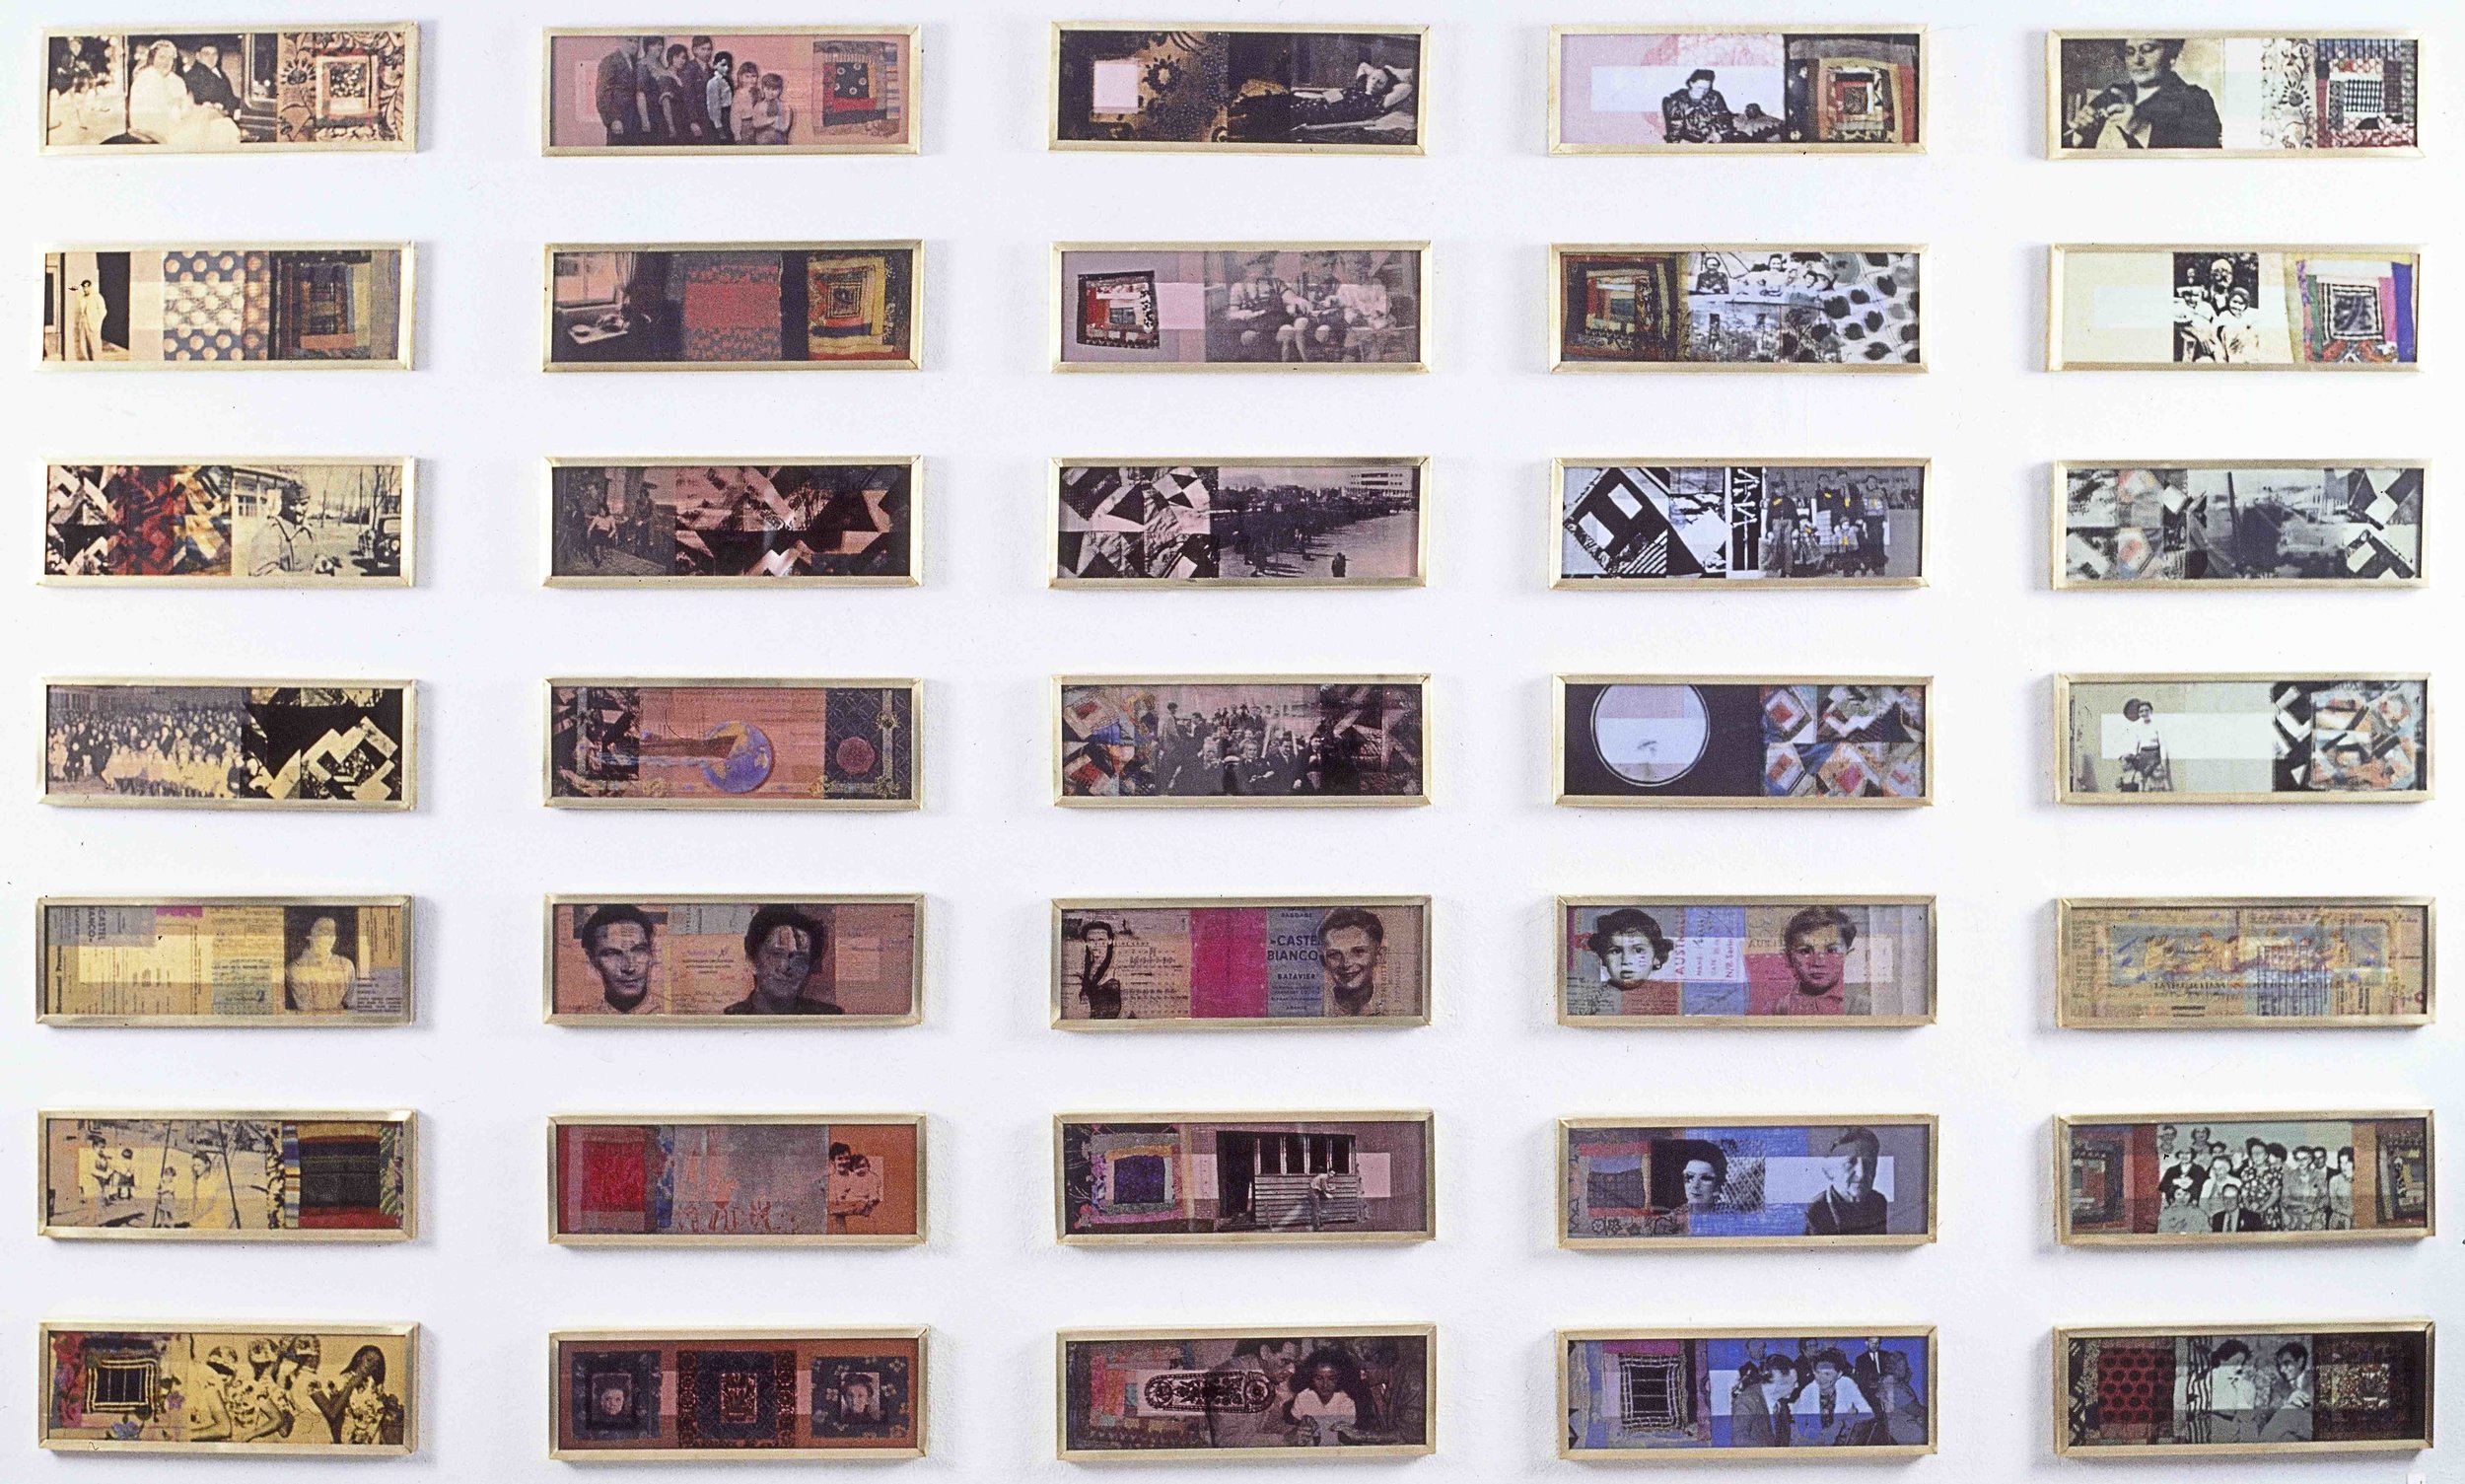 Quilt 1 (1934-1954) 1995, 15 x 45cm each (35 panels), photographic transfer on acrylic sheet with Bio paint on board. Art Gallery of Western Australia Collection.jpg